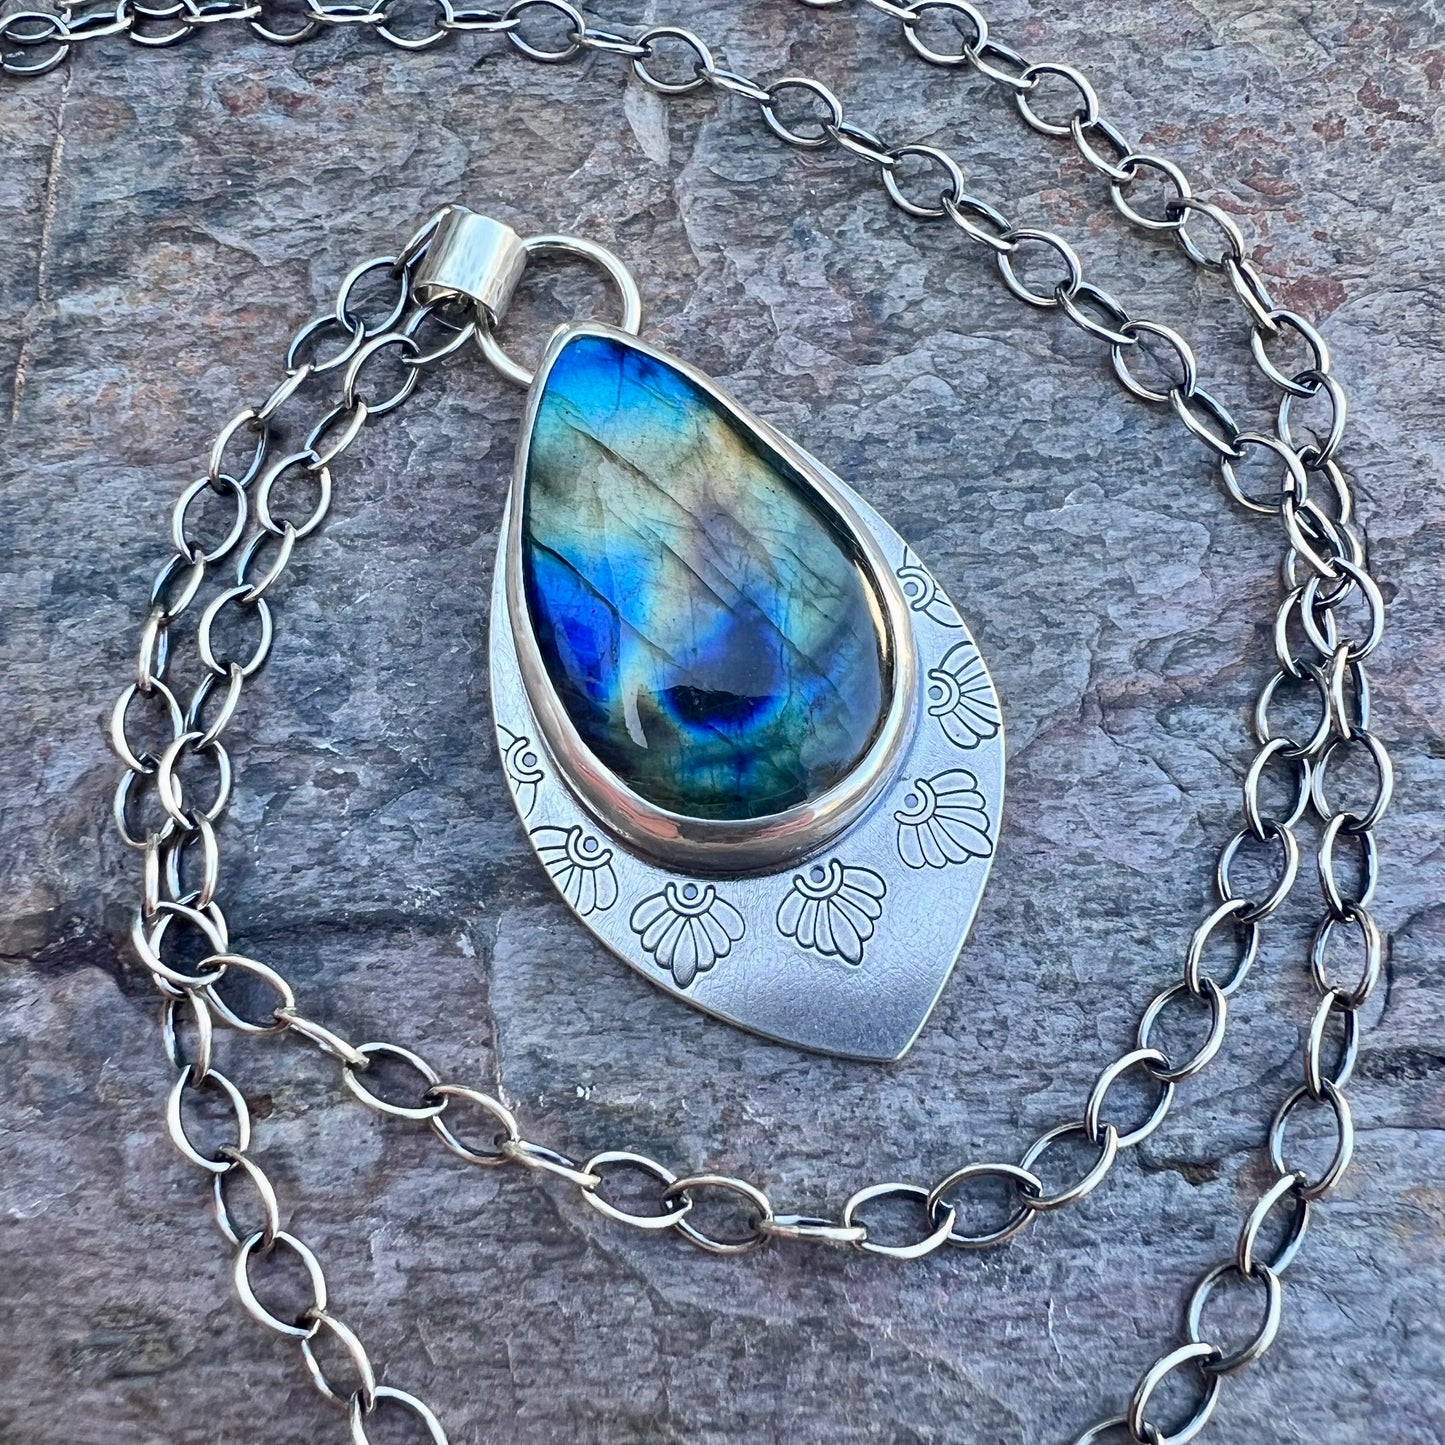 Labradorite Sterling Silver Necklace - Handmade One-of-a-kind Pendant on Sterling Silver Chain